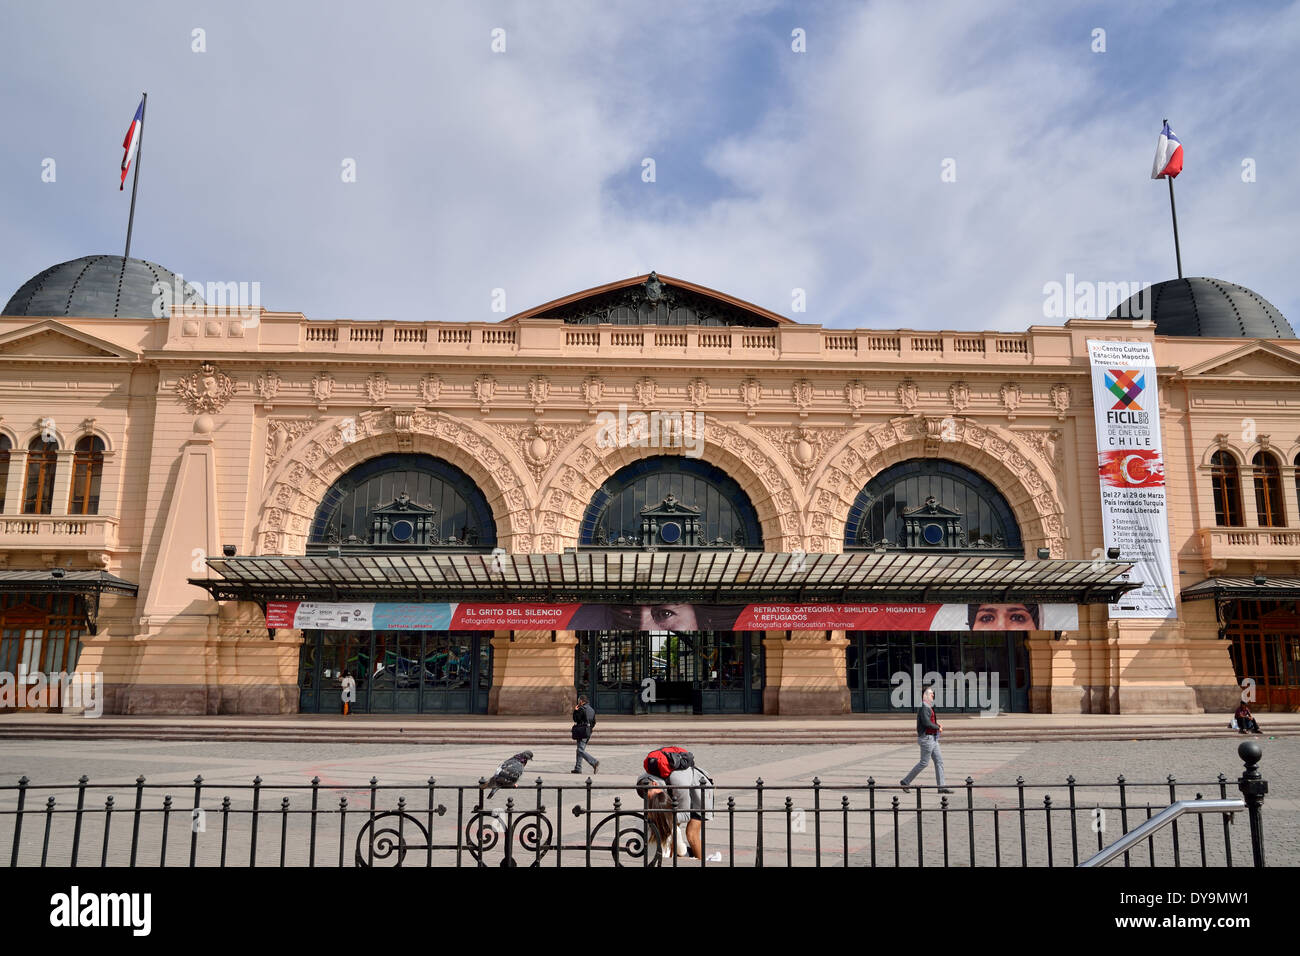 frontage of Estación Mapocho building now serves as a cultural center. The station is used for art exhibits and performances. Stock Photo